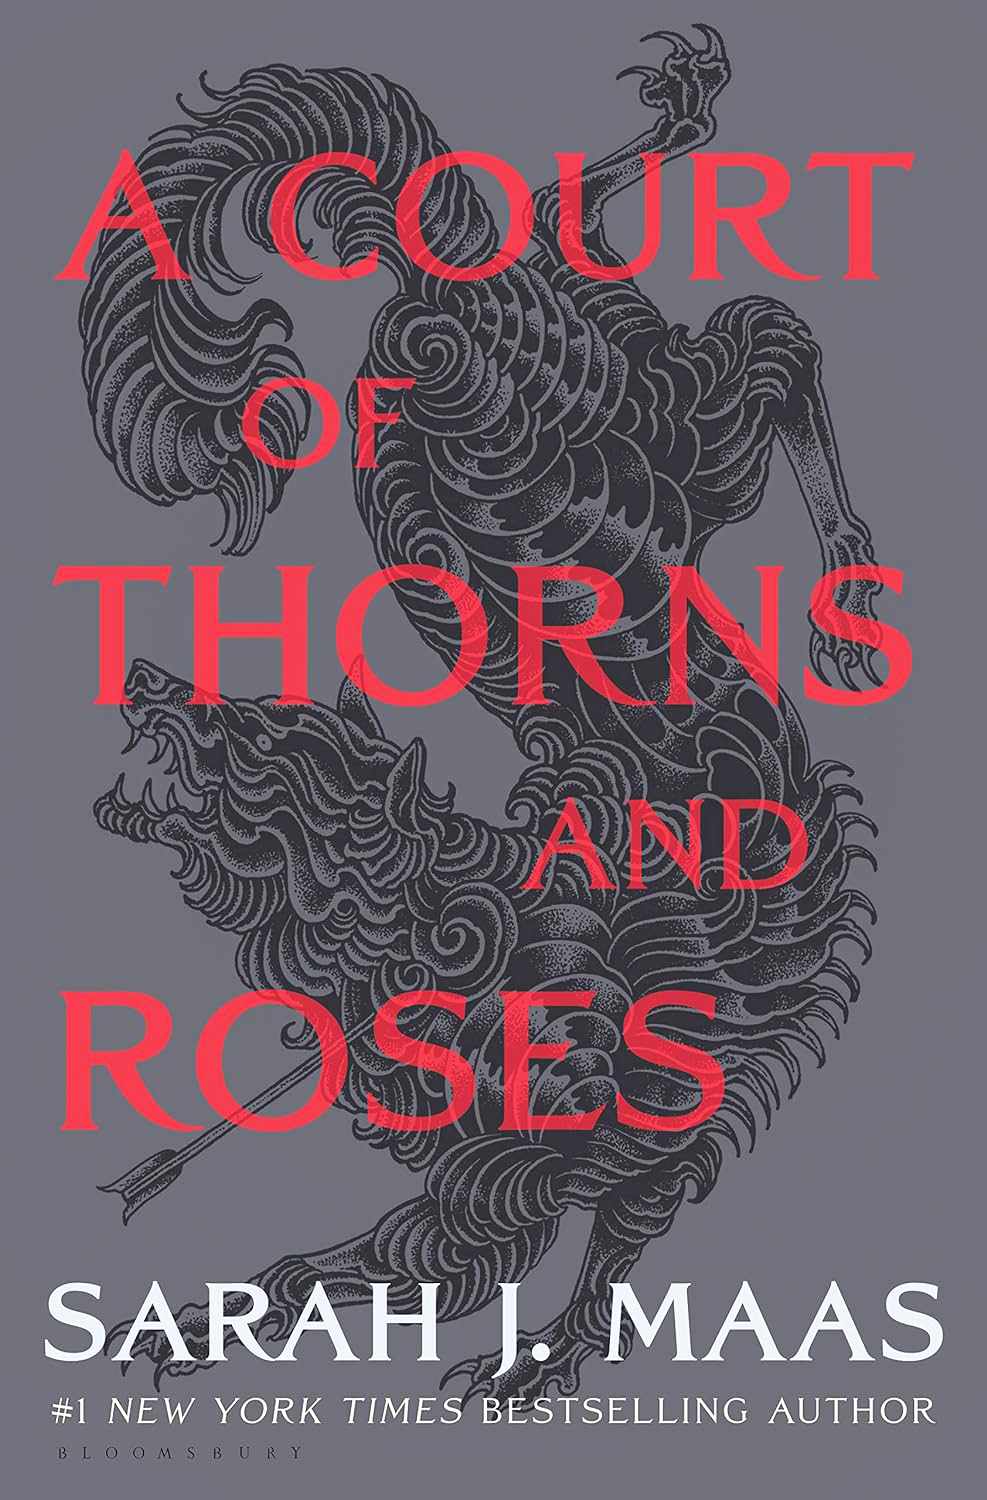 A Court of Thorns and Roses Book by Sarah J. Maas